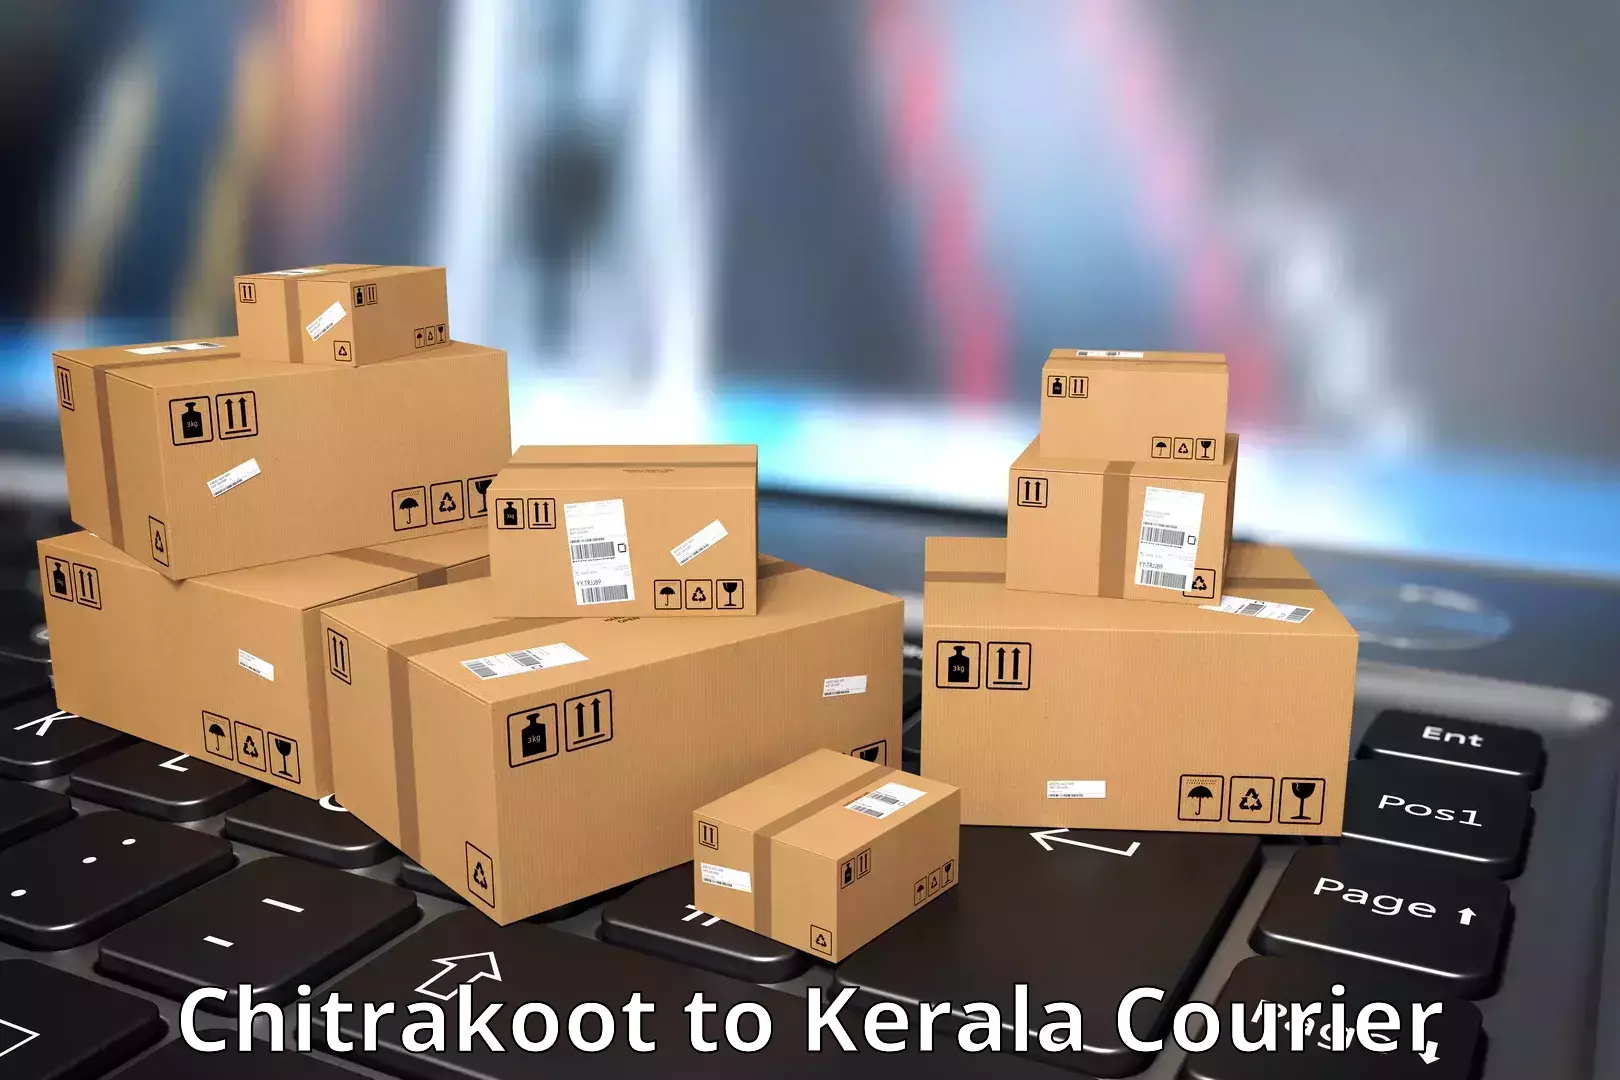 Global shipping solutions Chitrakoot to Trivandrum